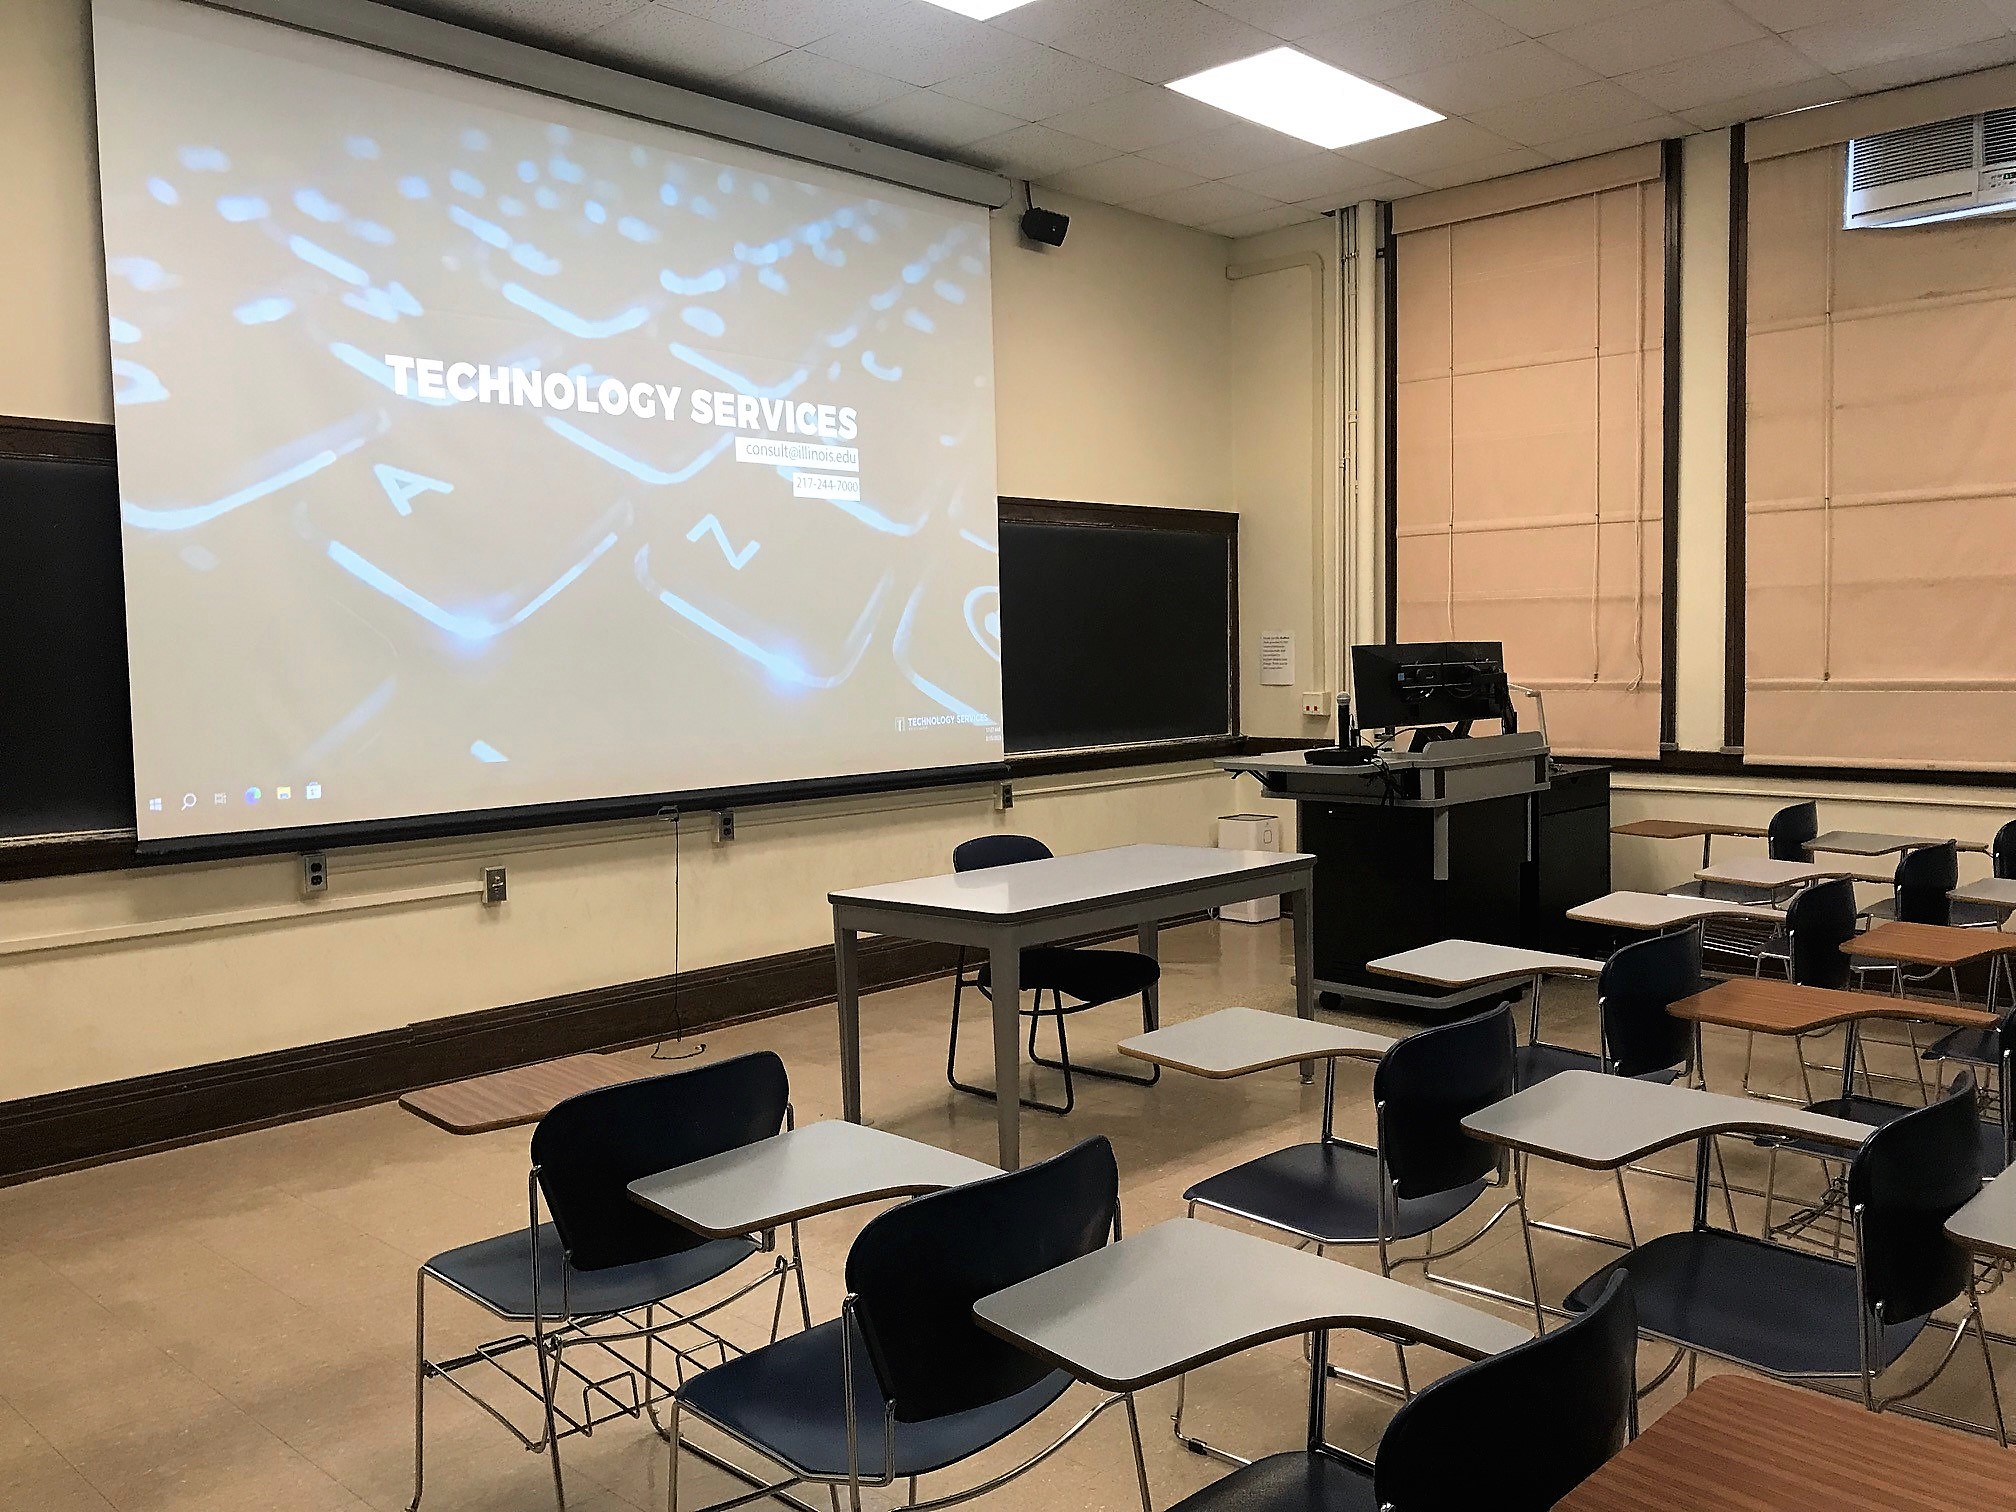 This is a view of the room, with student desks, a front lecture table, projection screen, instructor table, and a chalkboard.